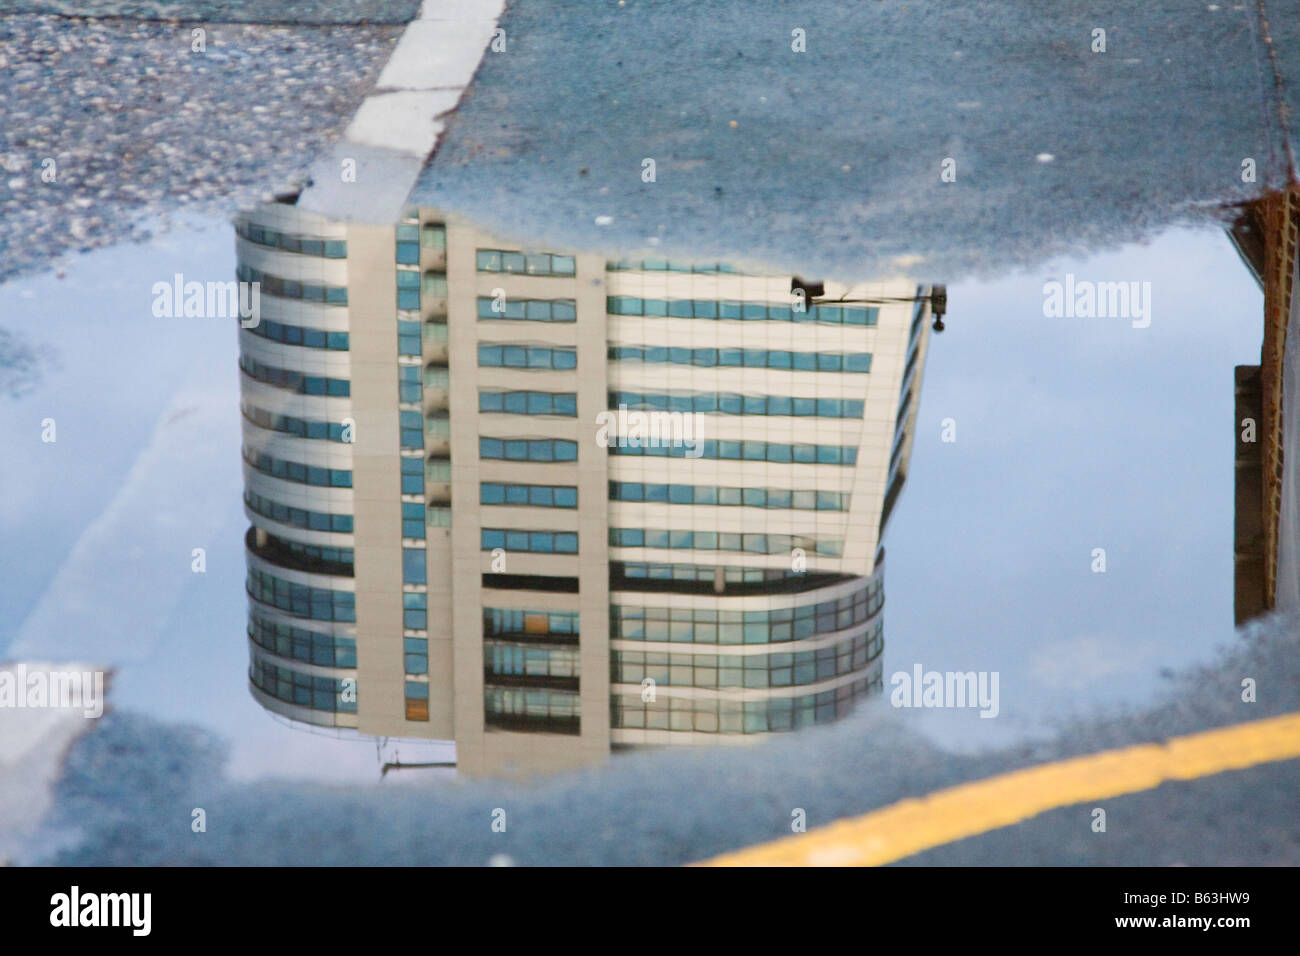 Bridgewater Place reflected in water Leeds city centre UK Stock Photo